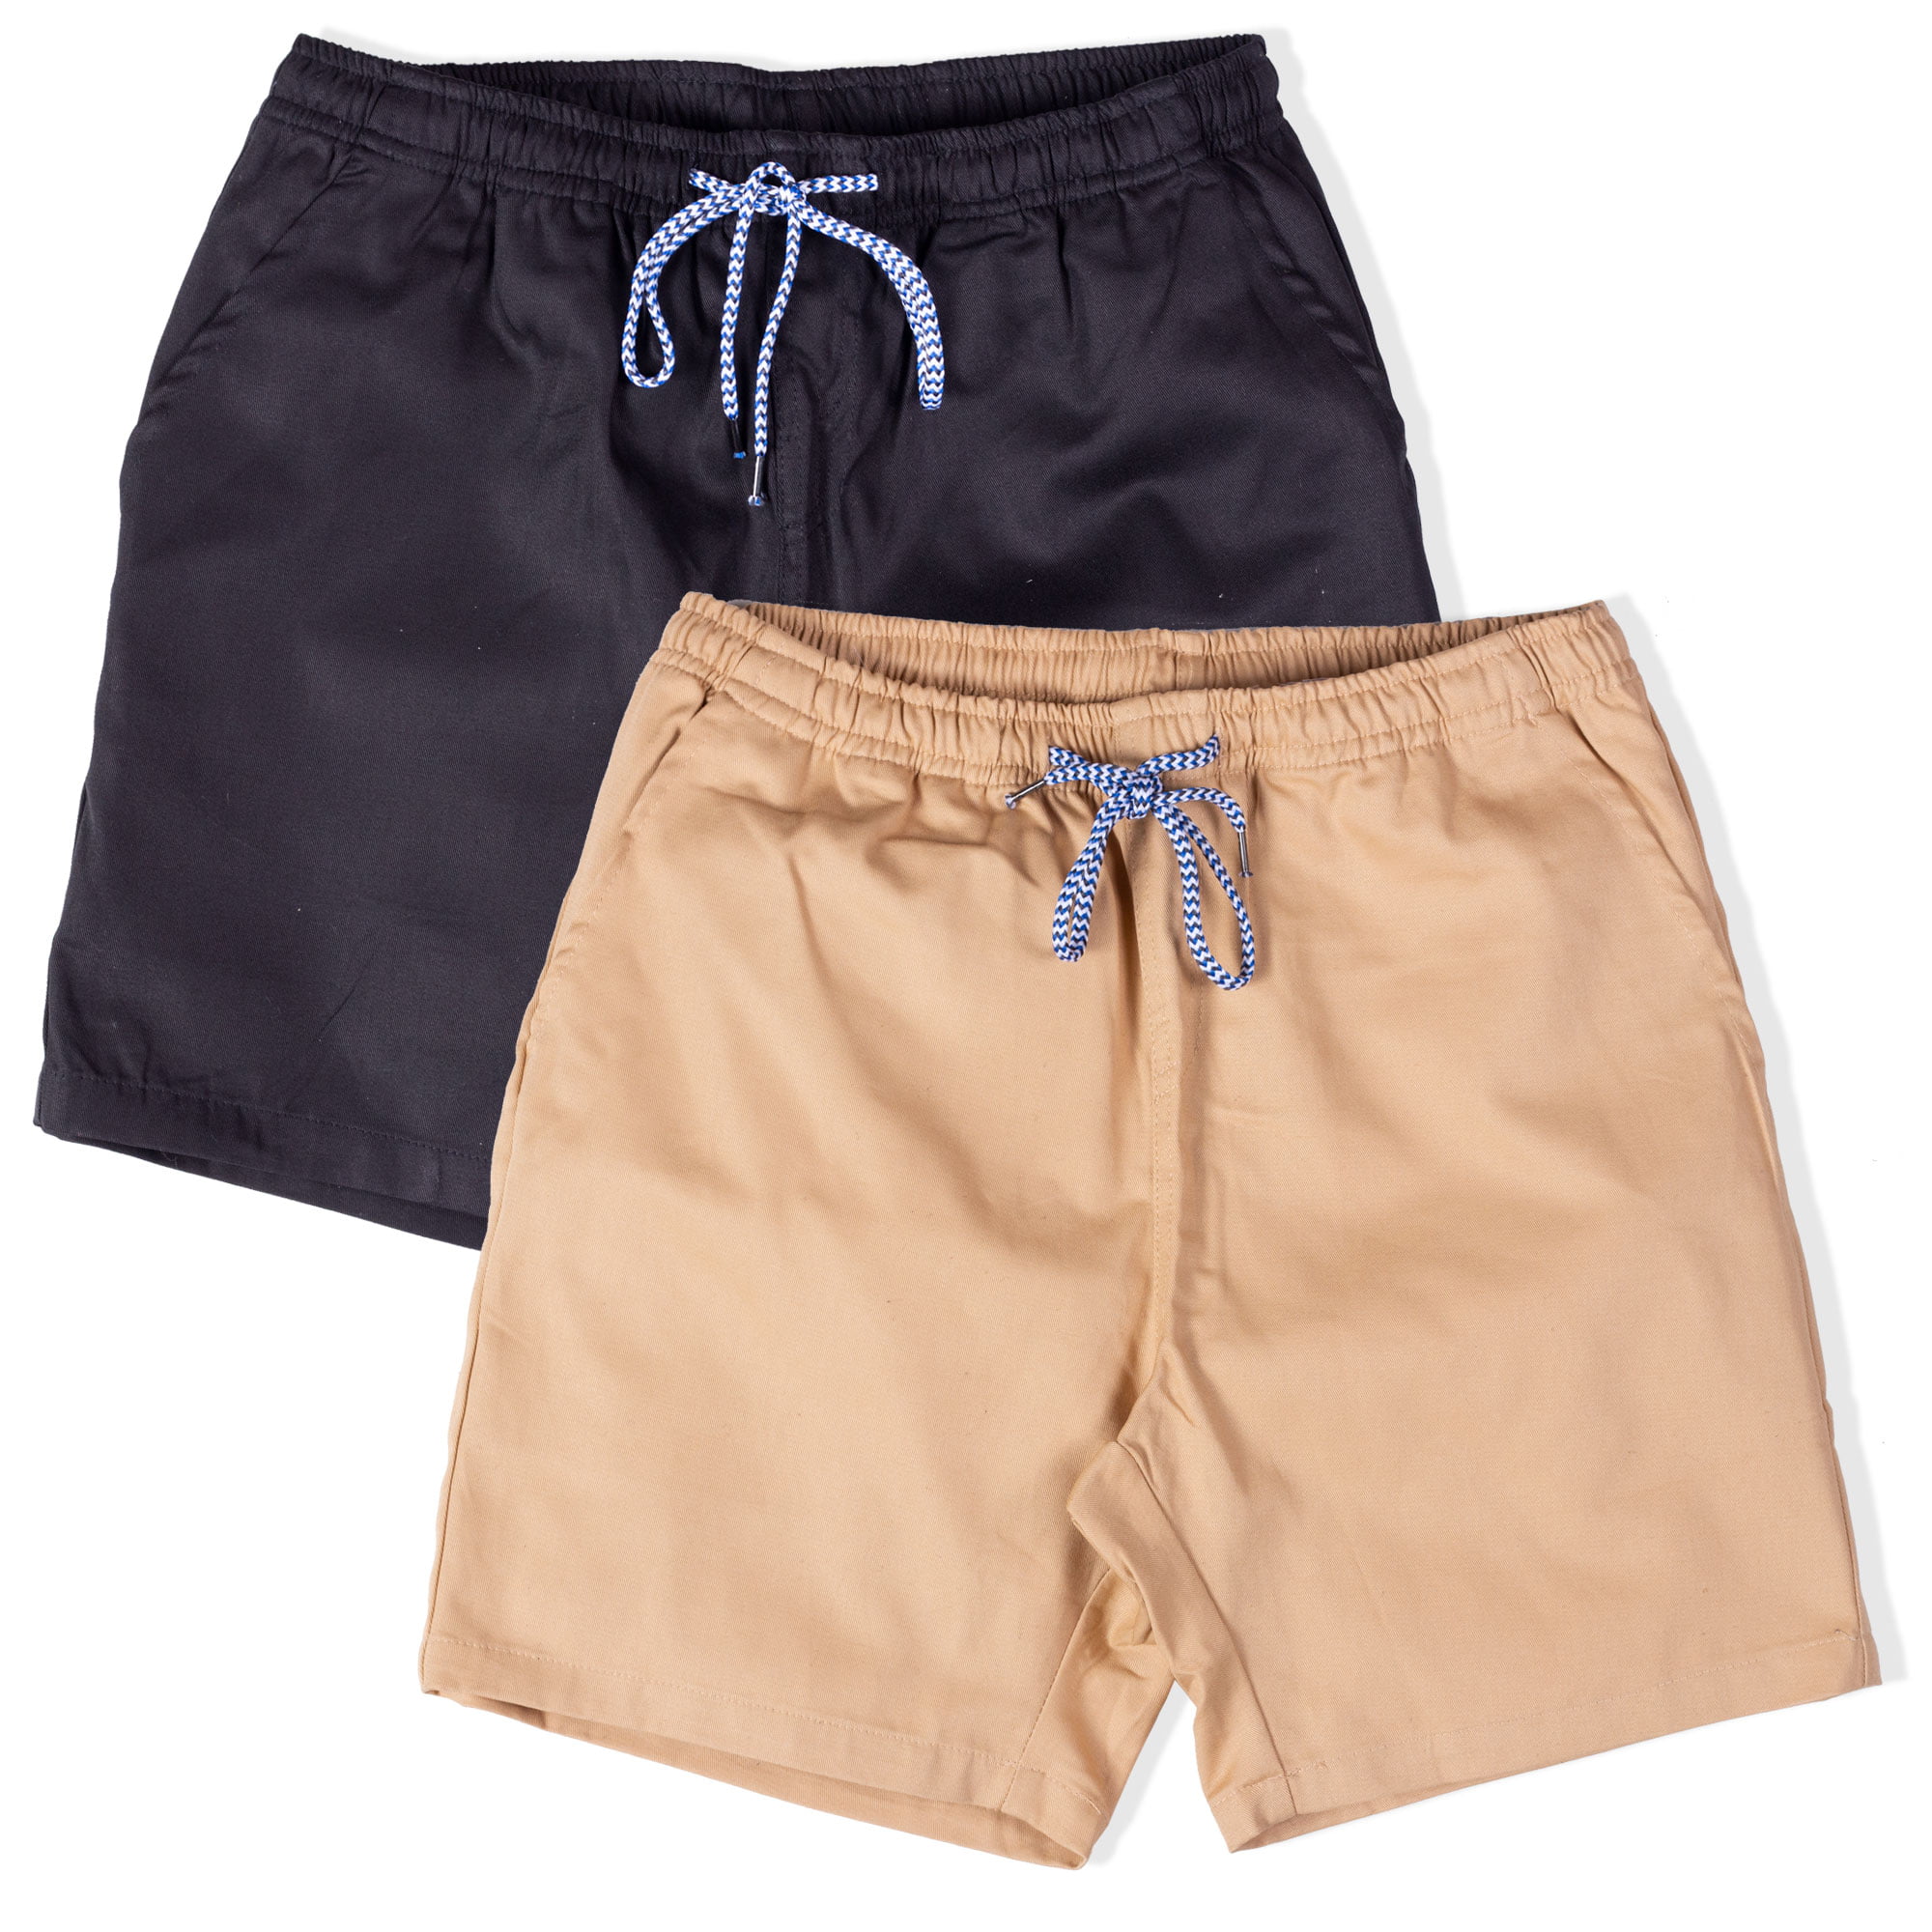 JJLIKER-Men Shorts Casual Classic Fit Drawstring Summer Beach Shorts with Elastic Waist and Pockets 